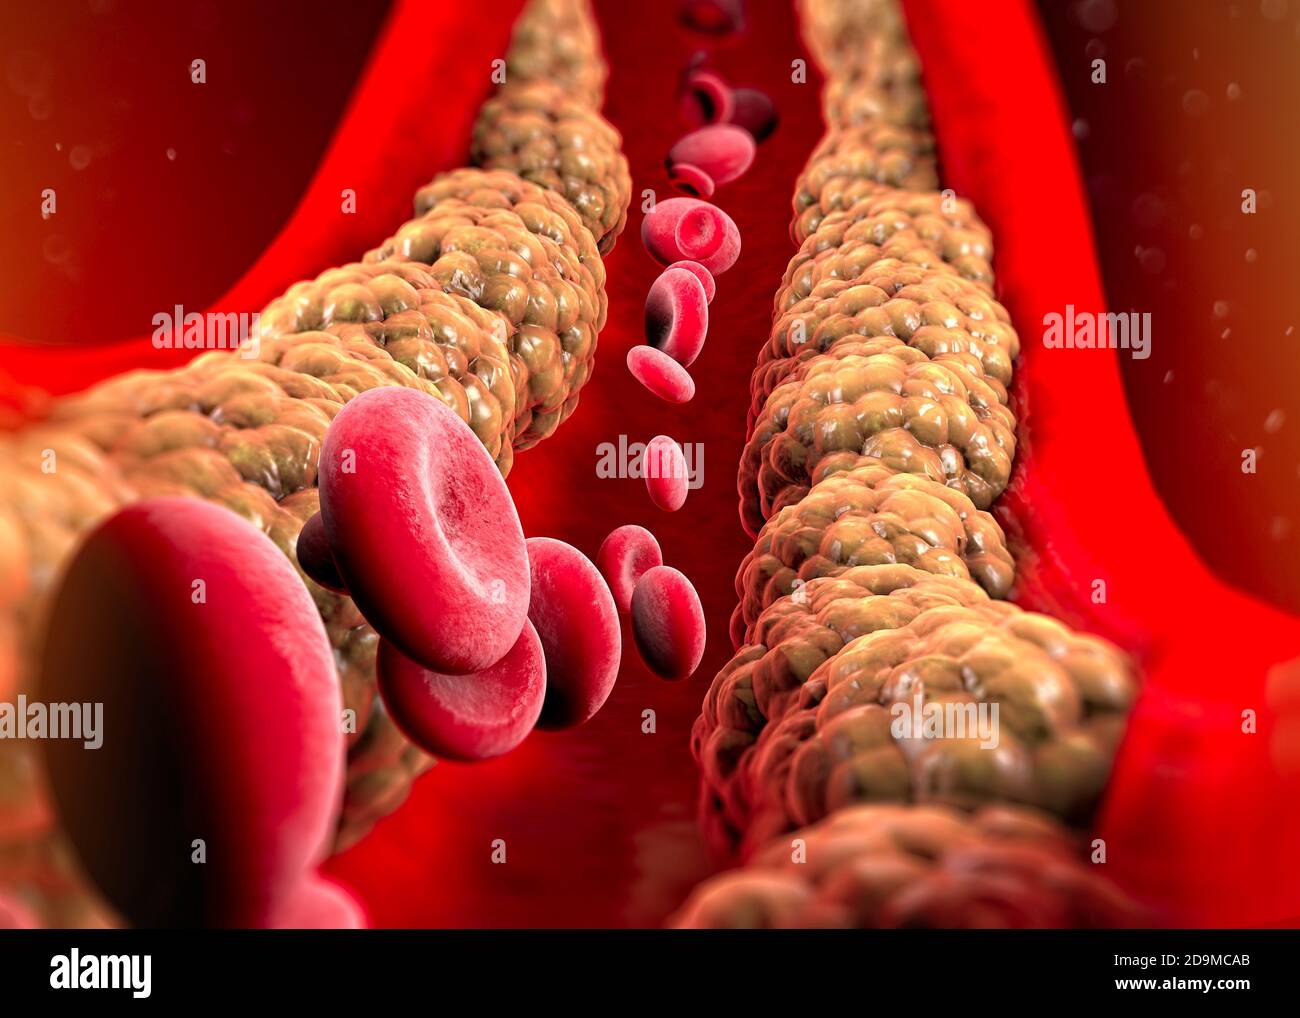 Cholesterol formation, fat, artery, vein, heart. Red blood cells, blood flow. Narrowing of a vein for fat formation. Surgery operation, 3d render Stock Photo